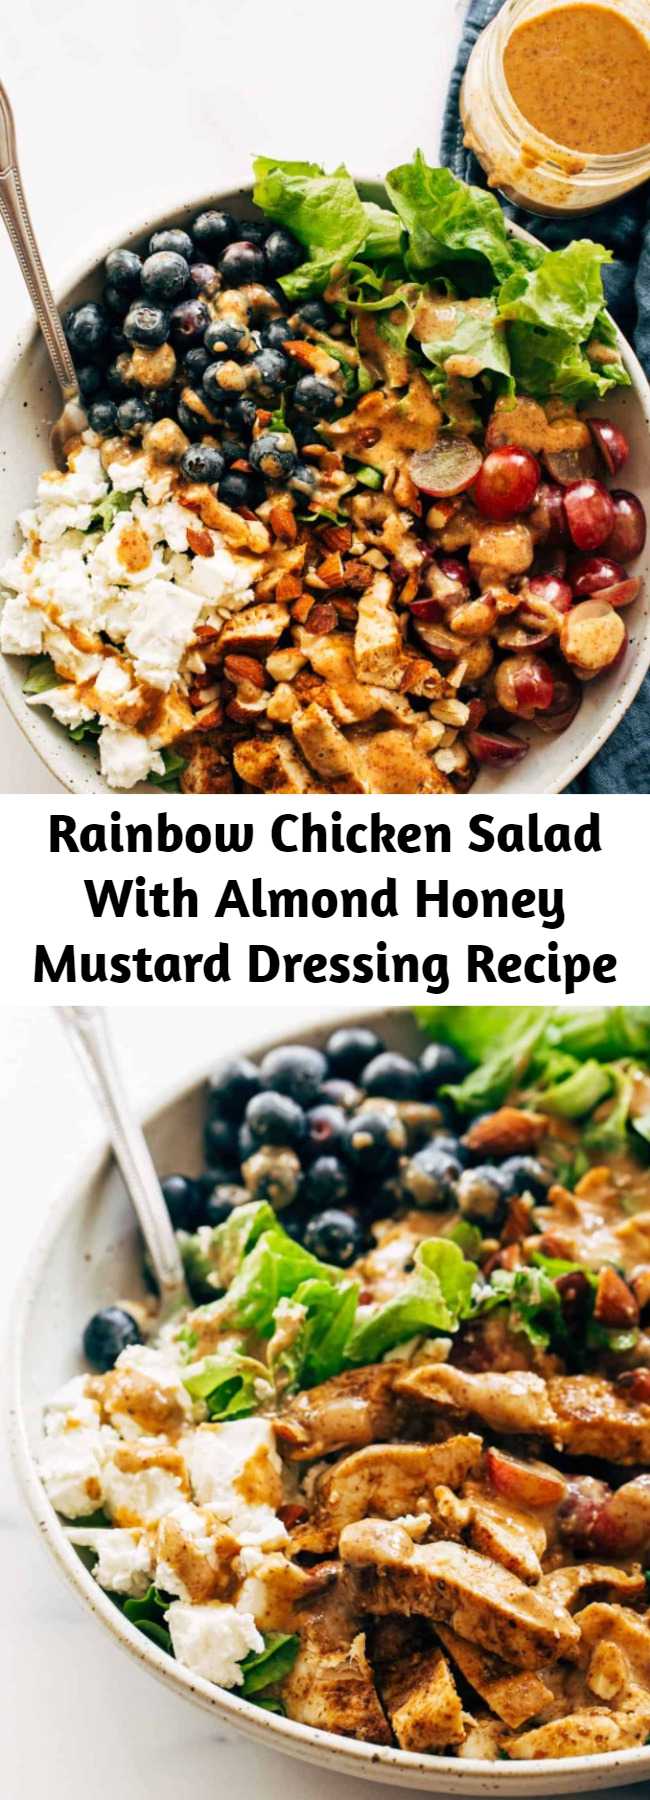 Rainbow Chicken Salad With Almond Honey Mustard Dressing Recipe - This Rainbow Chicken Salad is topped with the most creamy and delicious homemade Almond Honey Mustard Dressing. Perfect for lunch or dinner! #glutenfree #healthy #salad #quickandeasyrecipe #healthyrecipe